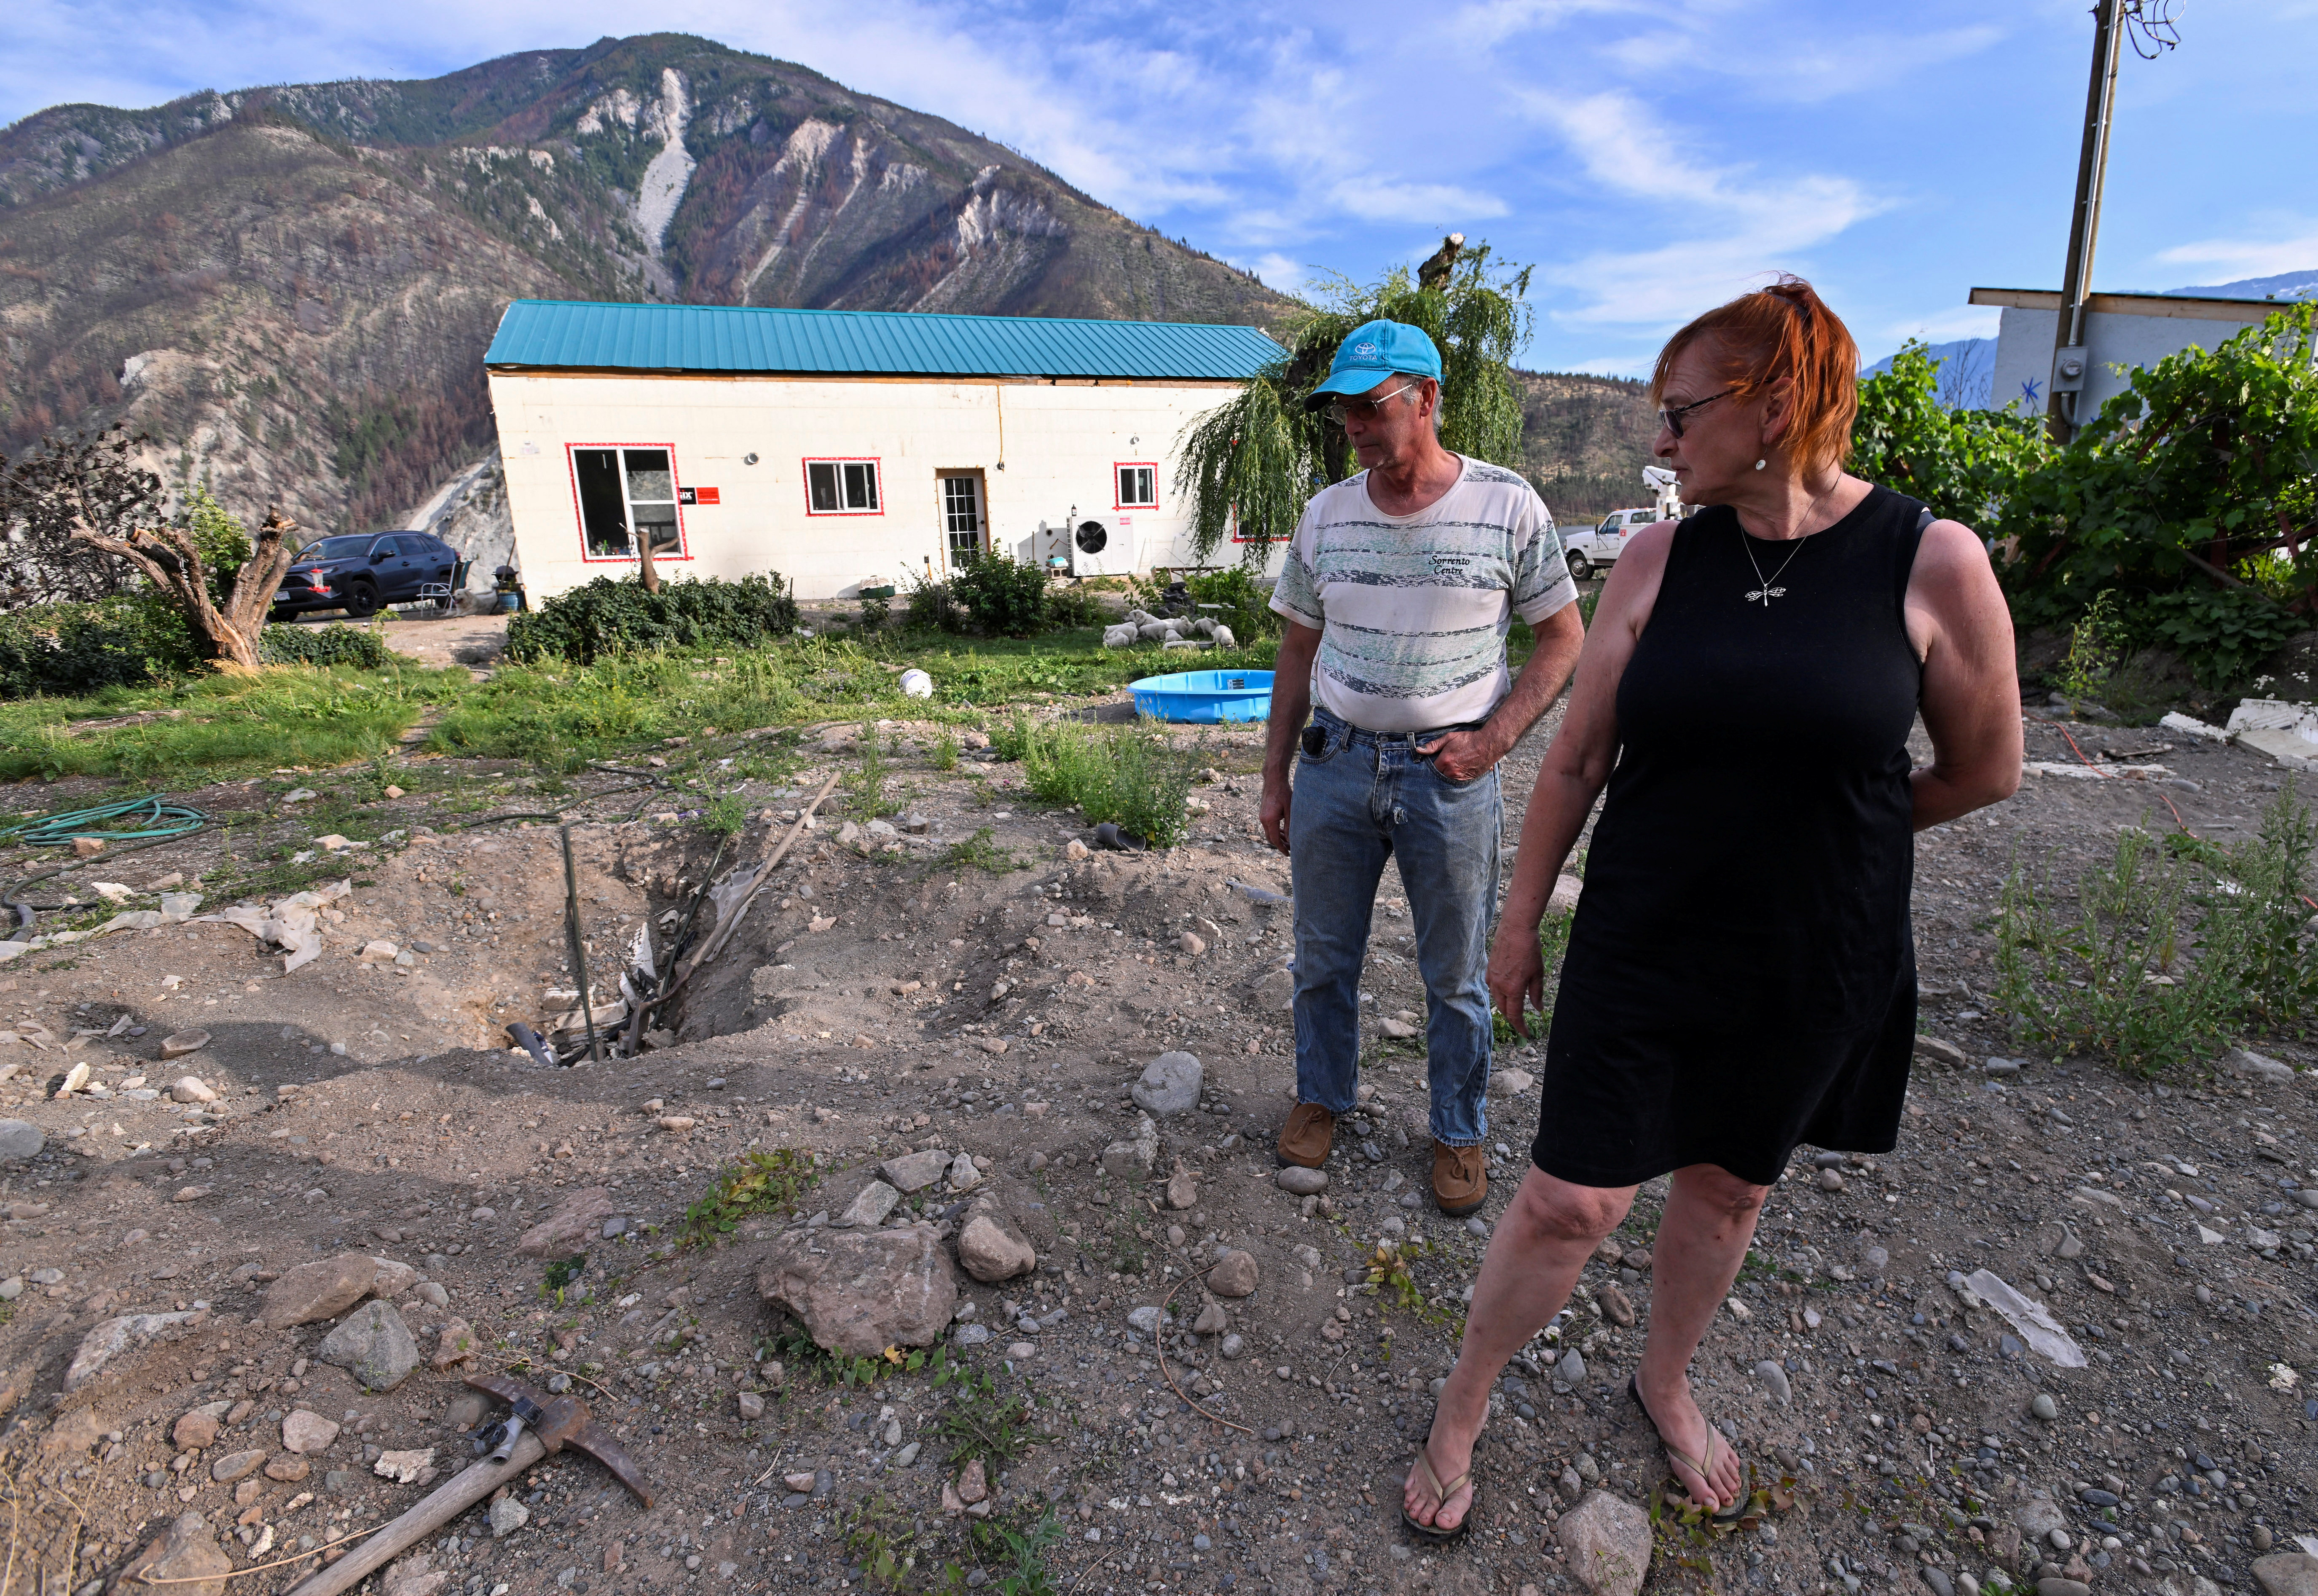 One year after a wildfire entirely destroyed the western Canadian village of Lytton